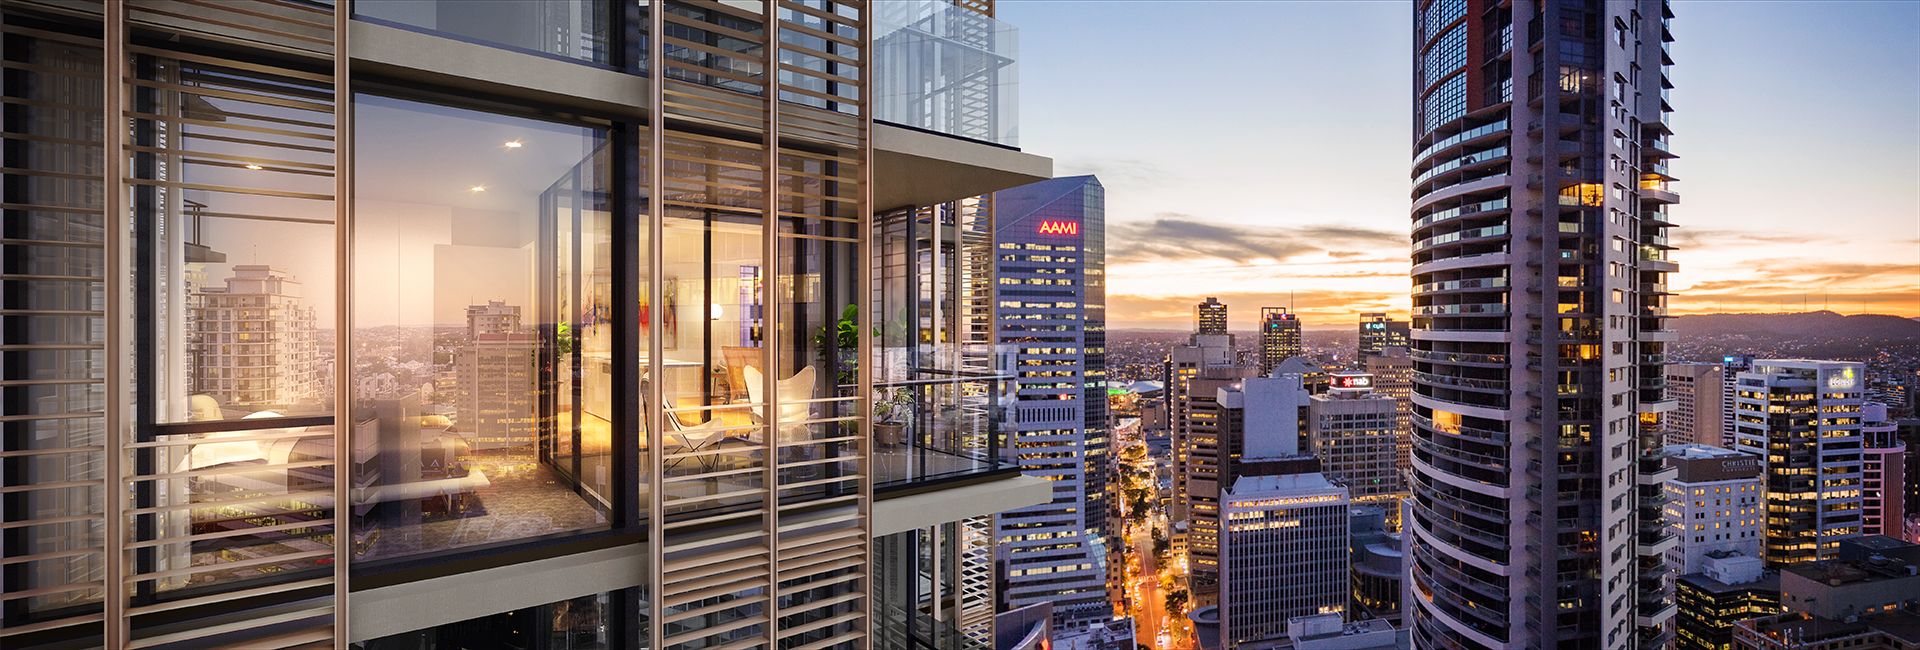 1 bedrooms New Apartments / Off the Plan in 3401/443 Queen St BRISBANE CITY QLD, 4000